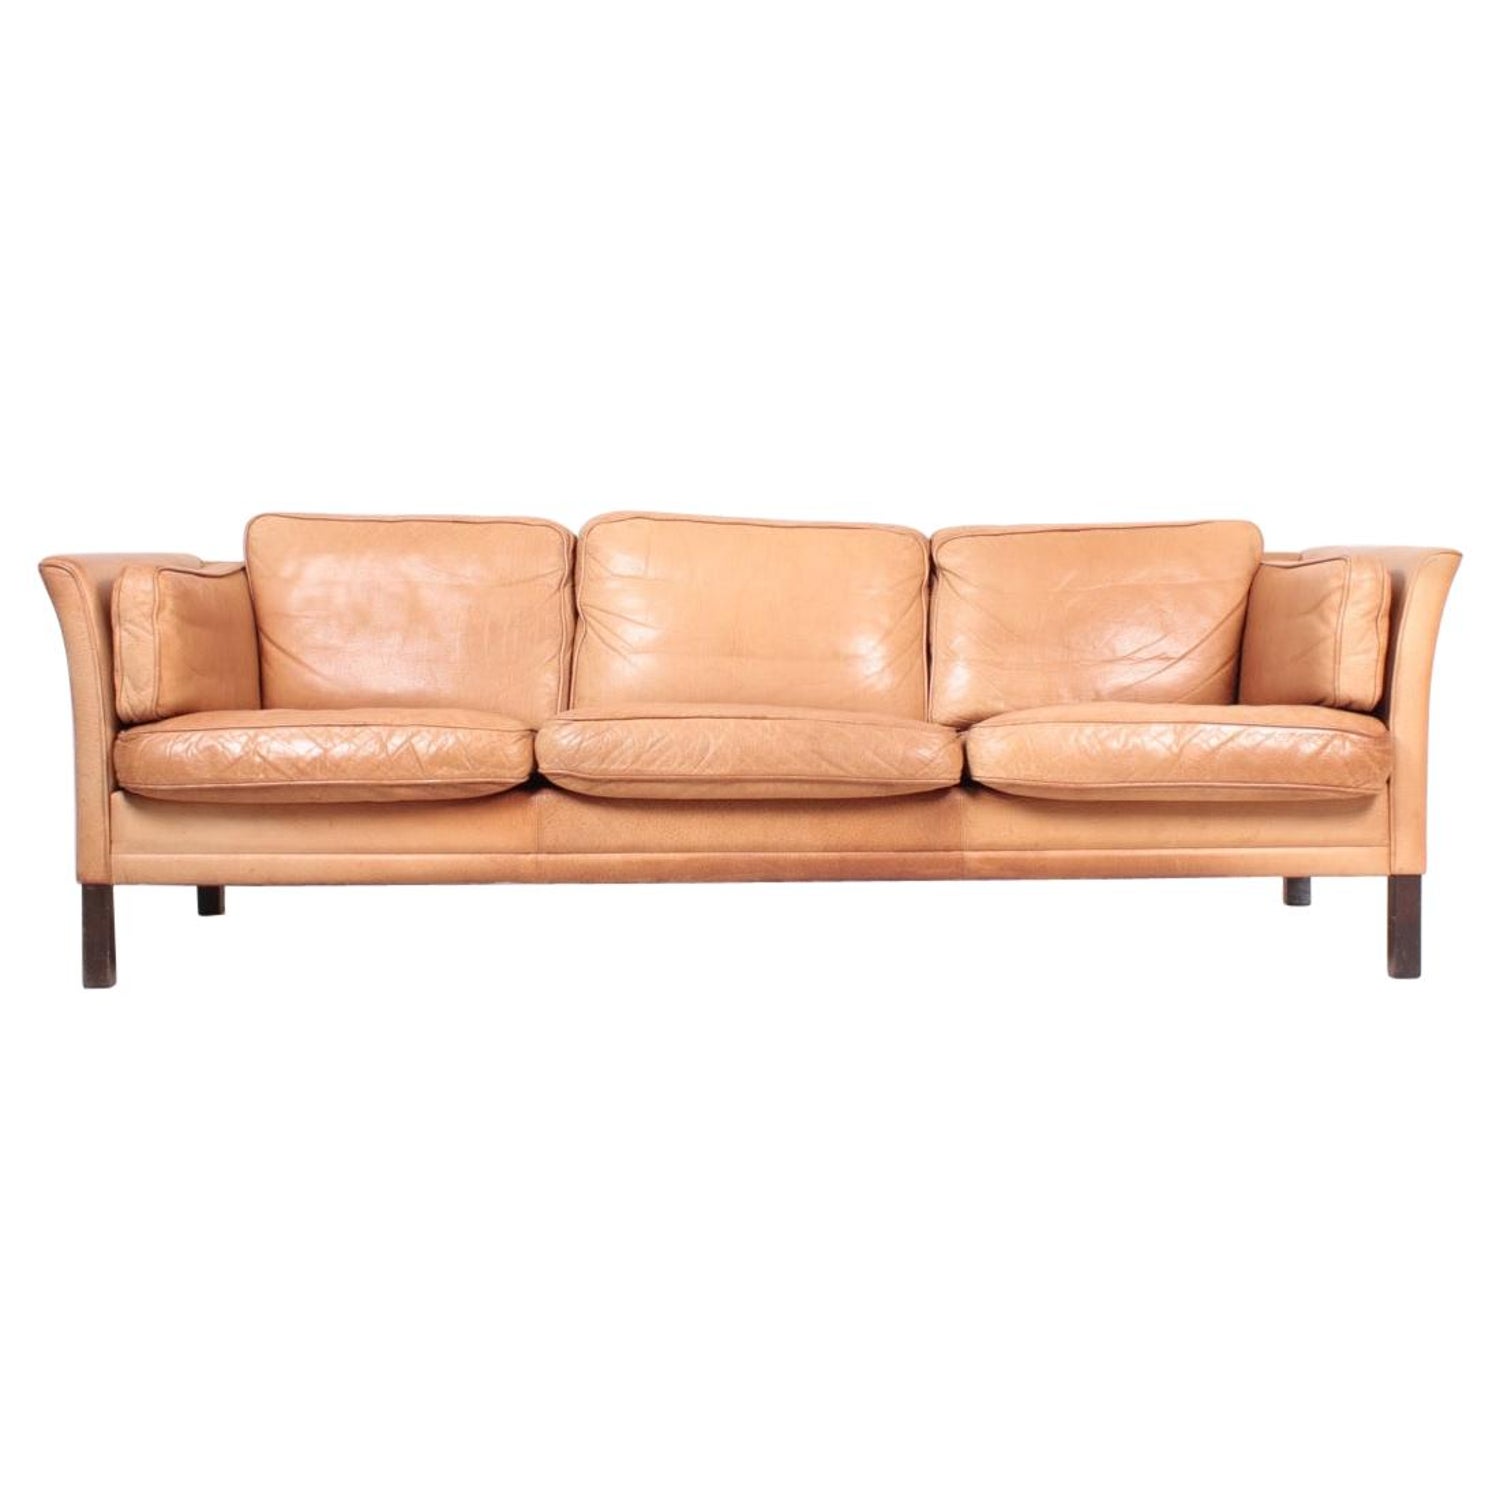 Midcentury Sofa in Patinated Leather by Mogens Hansen, Danish Design at  1stDibs